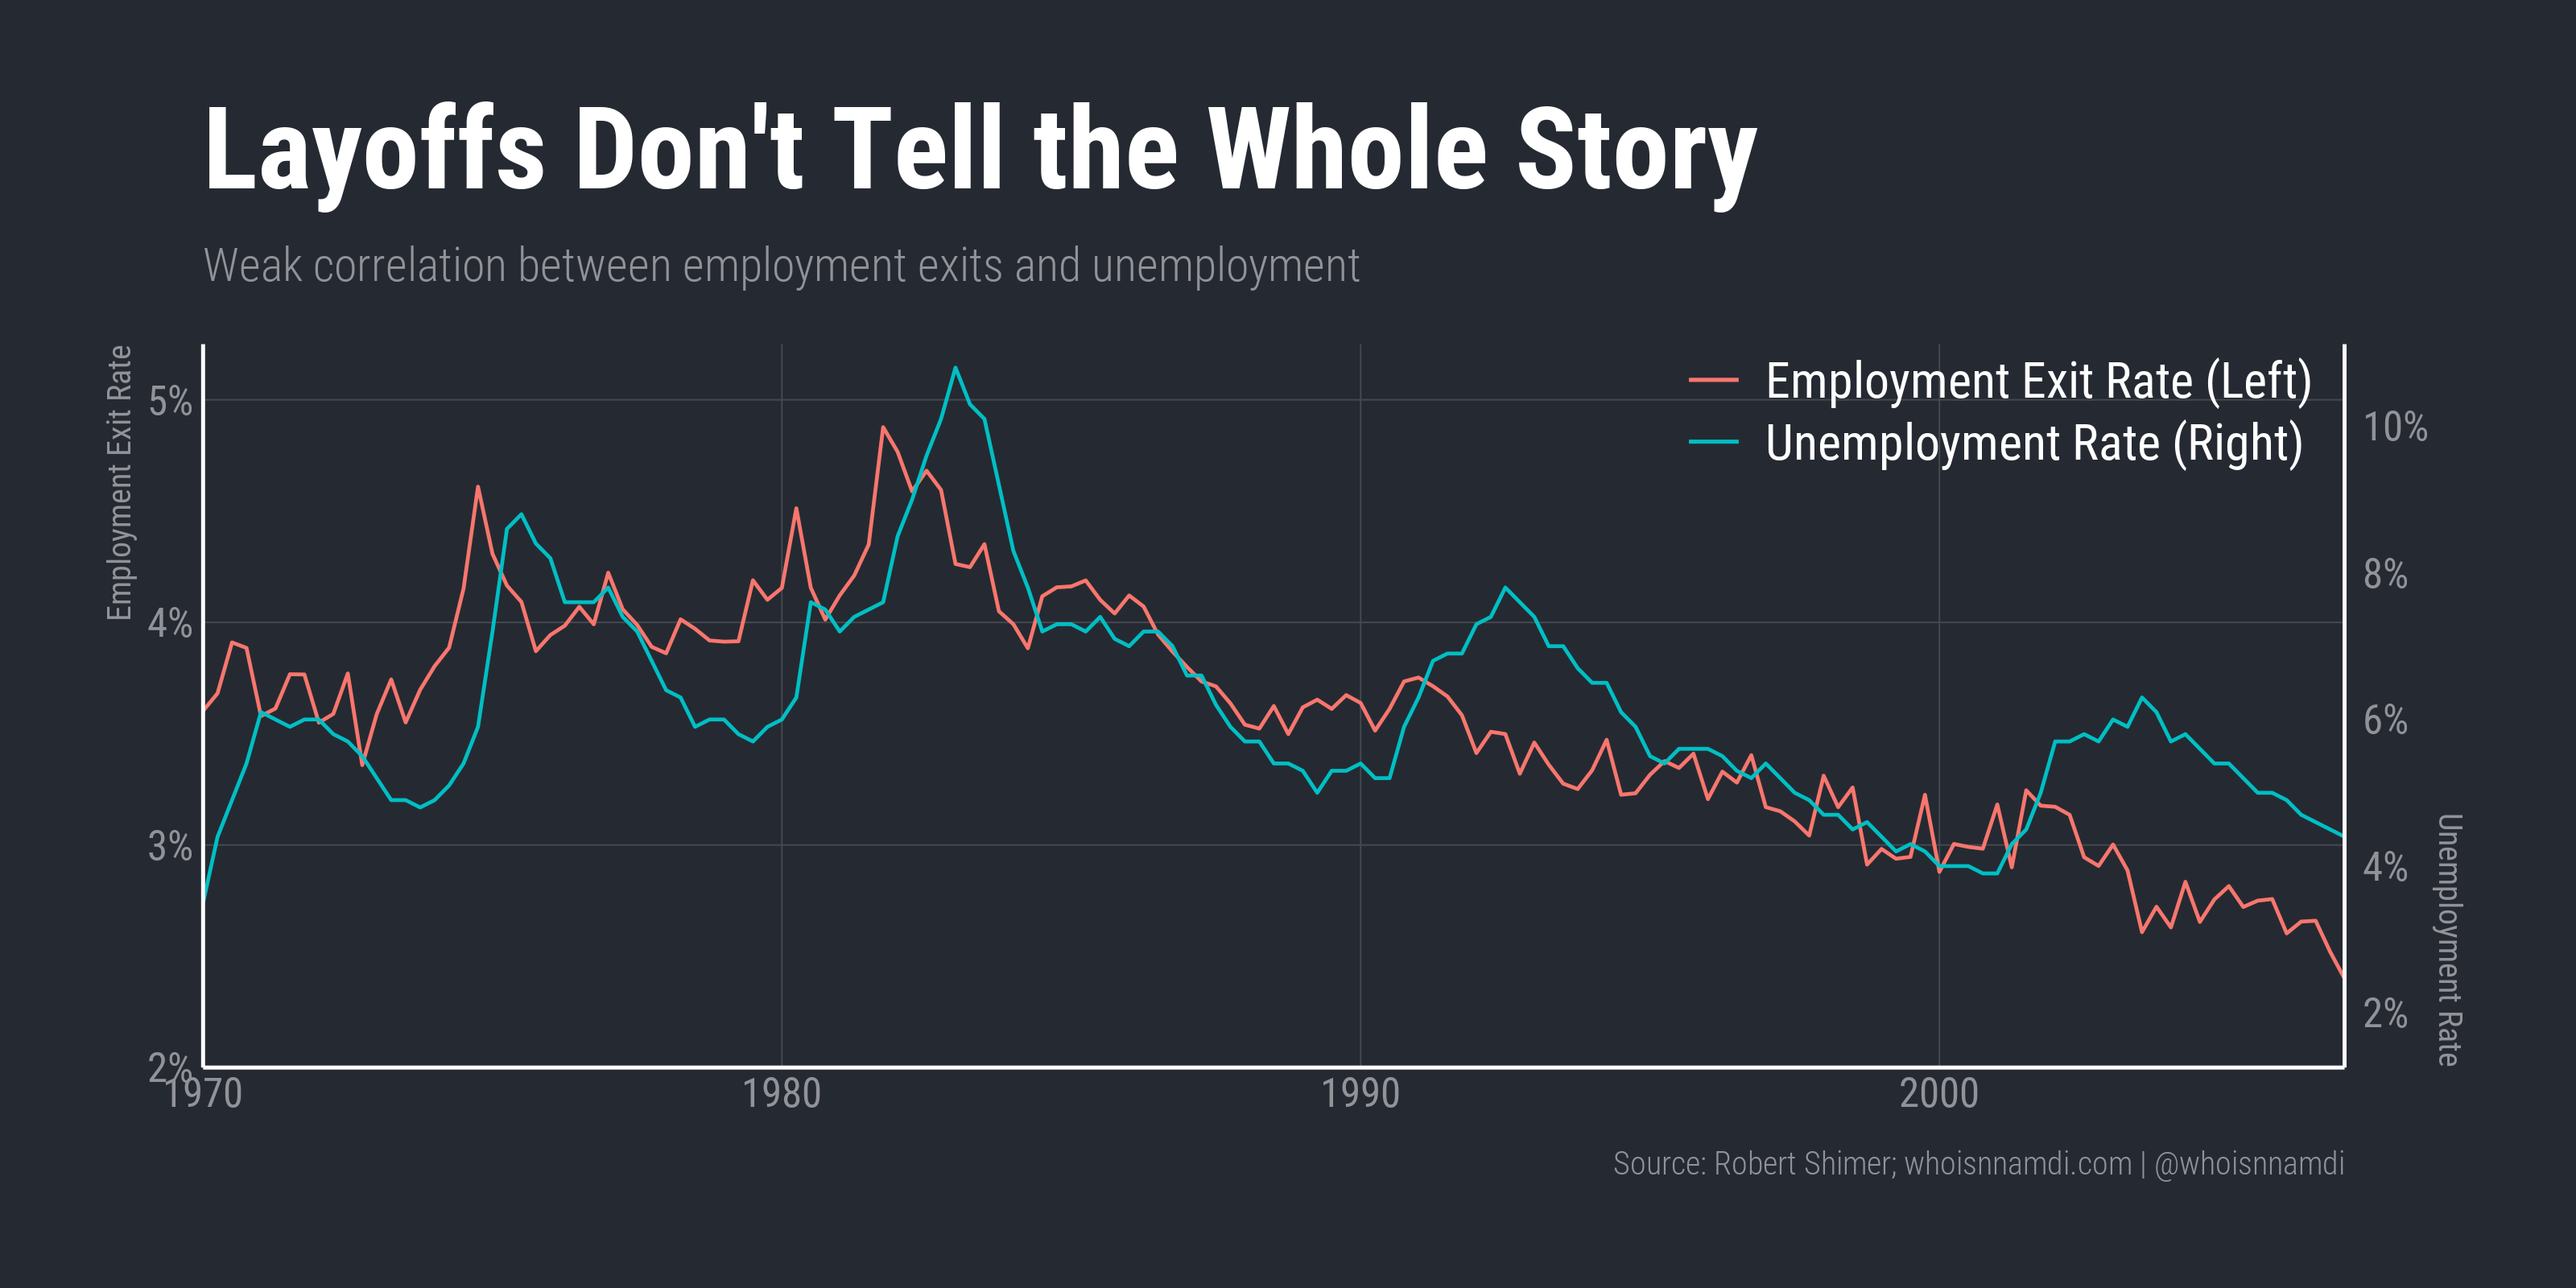 Layoffs Don't Tell the Whole Story